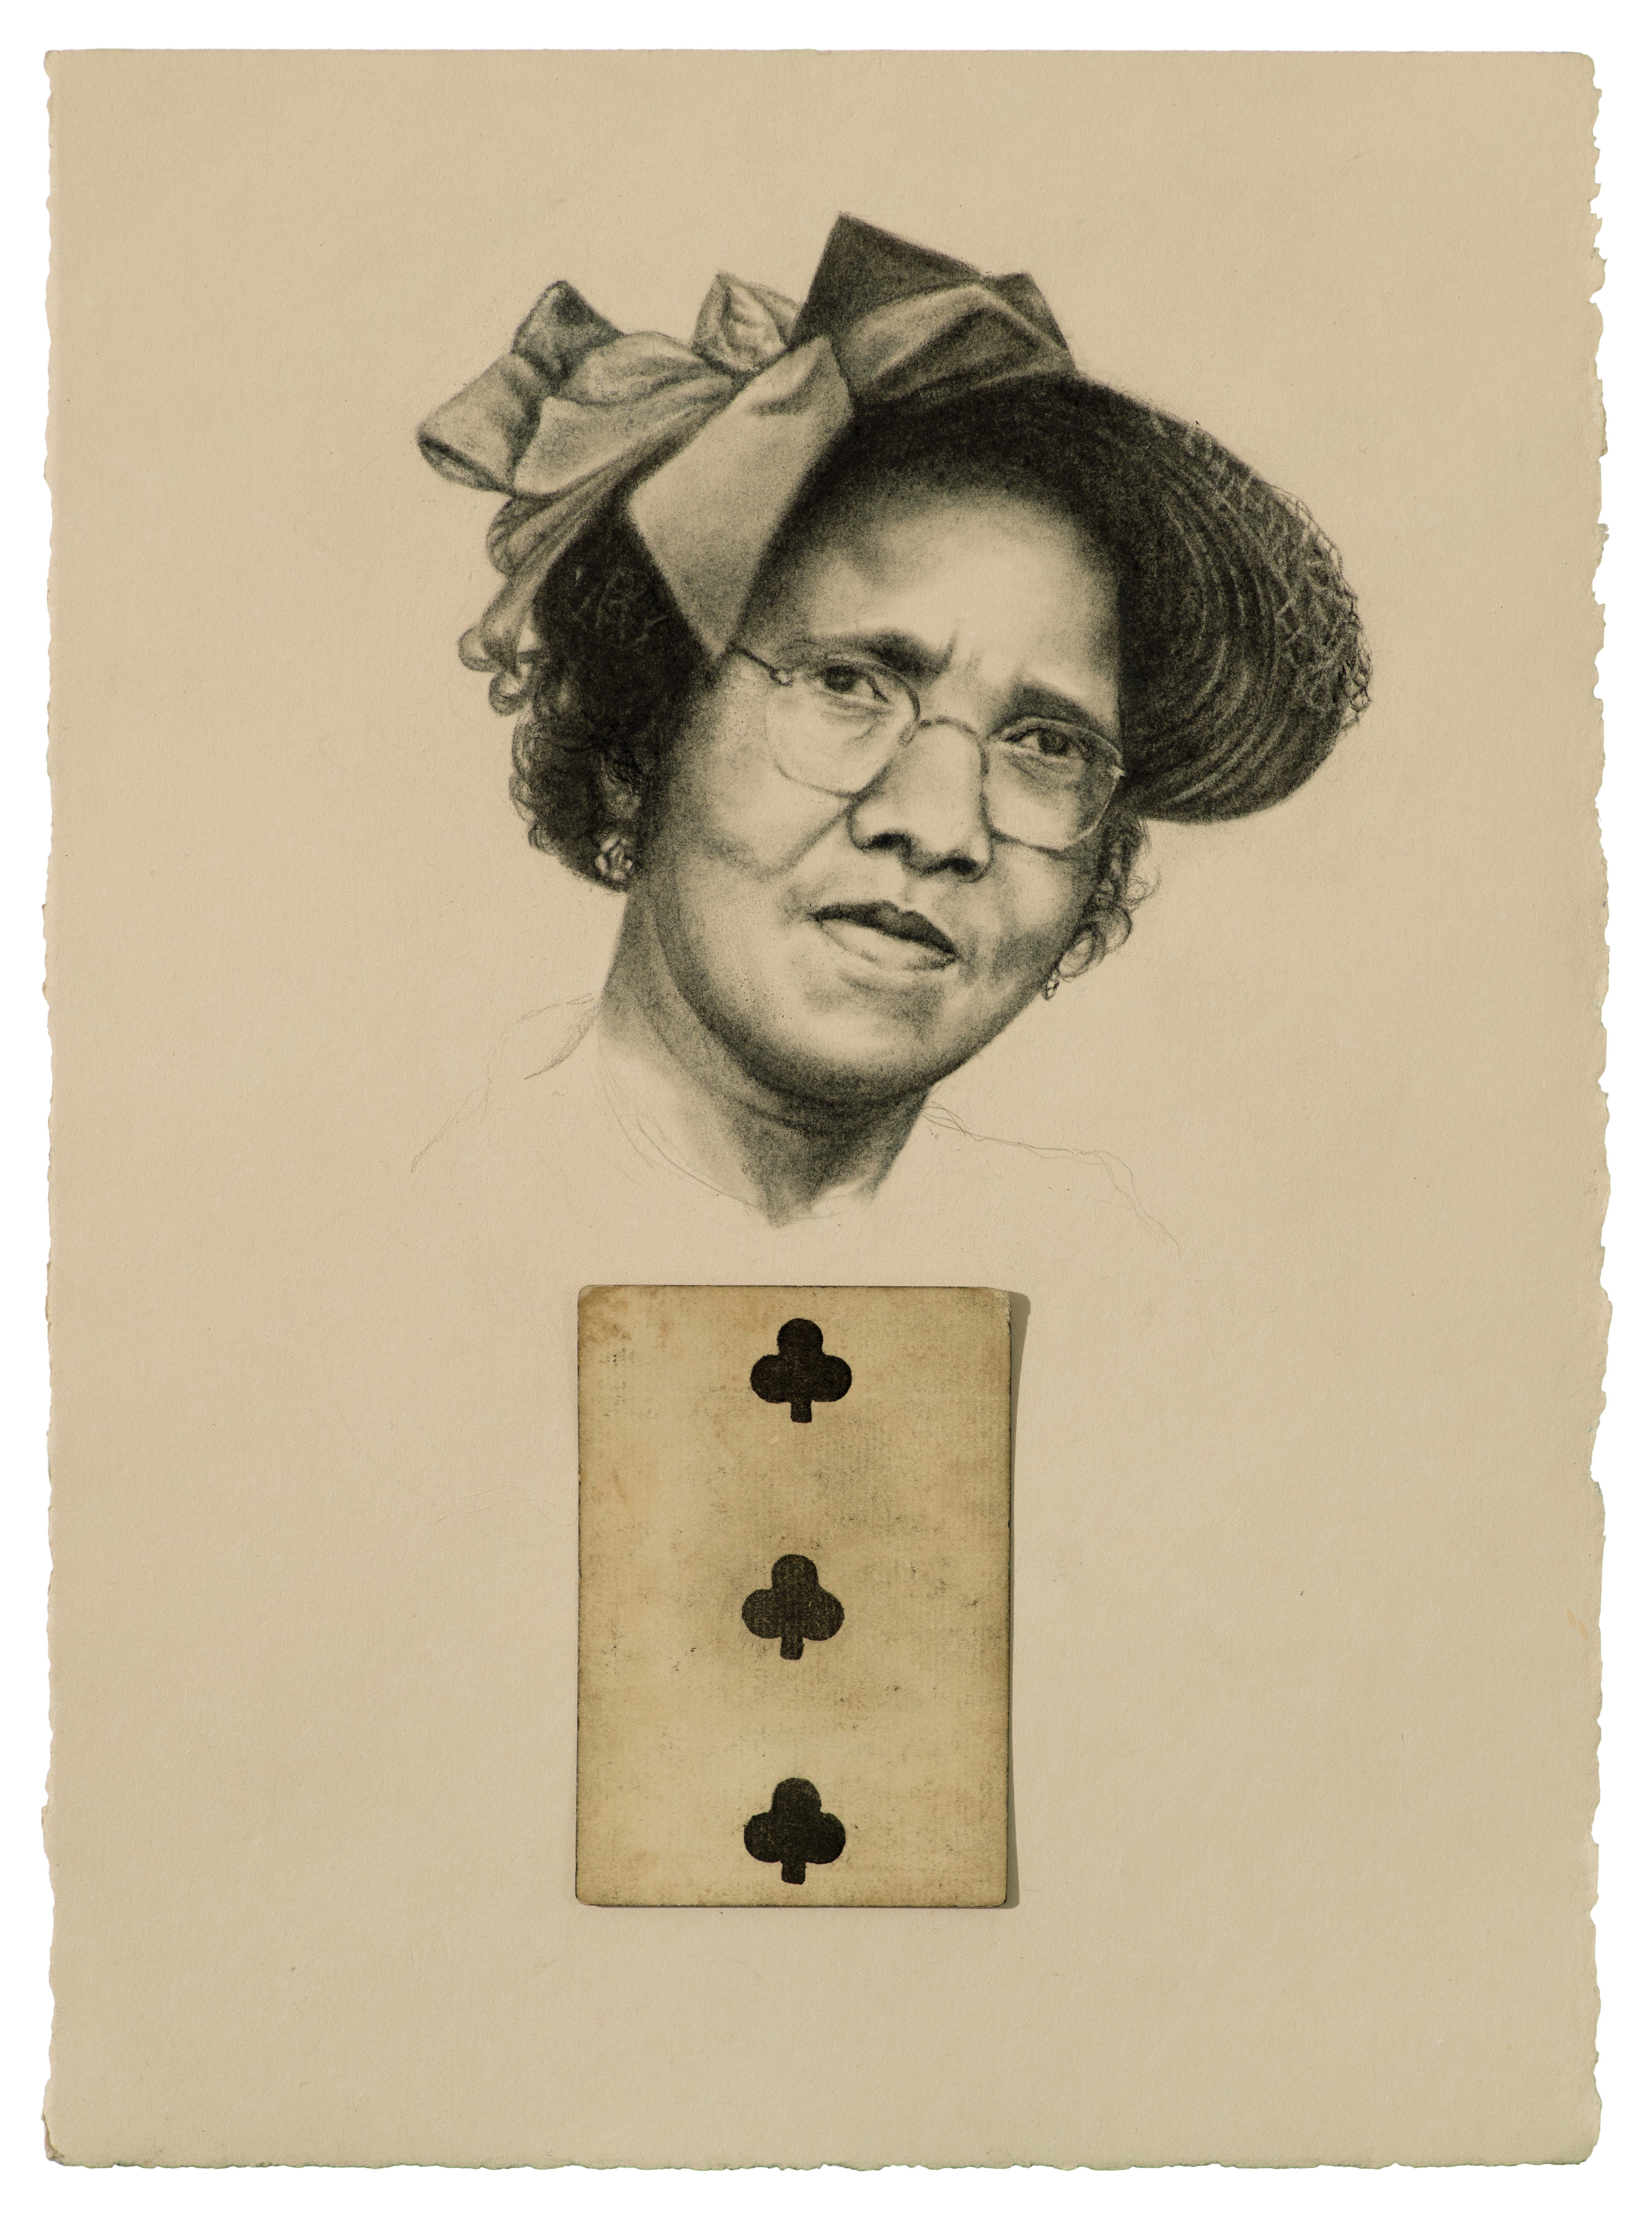 Disembodied head of a woman in an elegant hat. Beneath her floats a 3 of clubs card from a standard French deck.